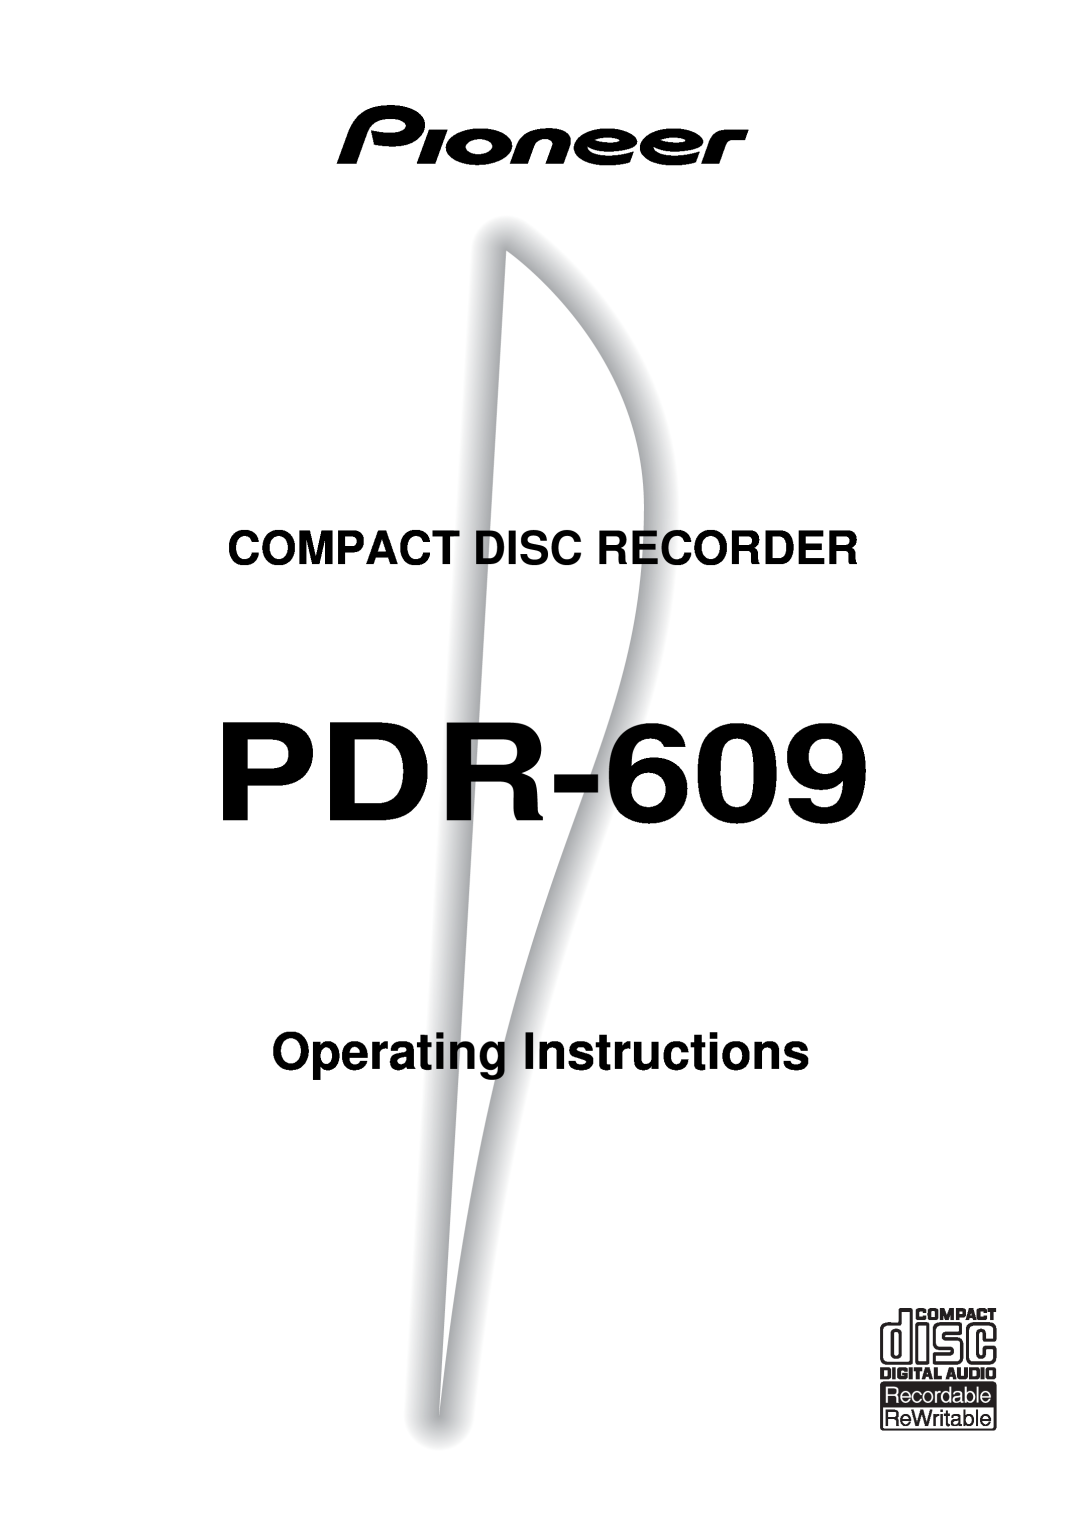 Pioneer PDR-609 operating instructions Operating Instructions, Compact Disc Recorder 